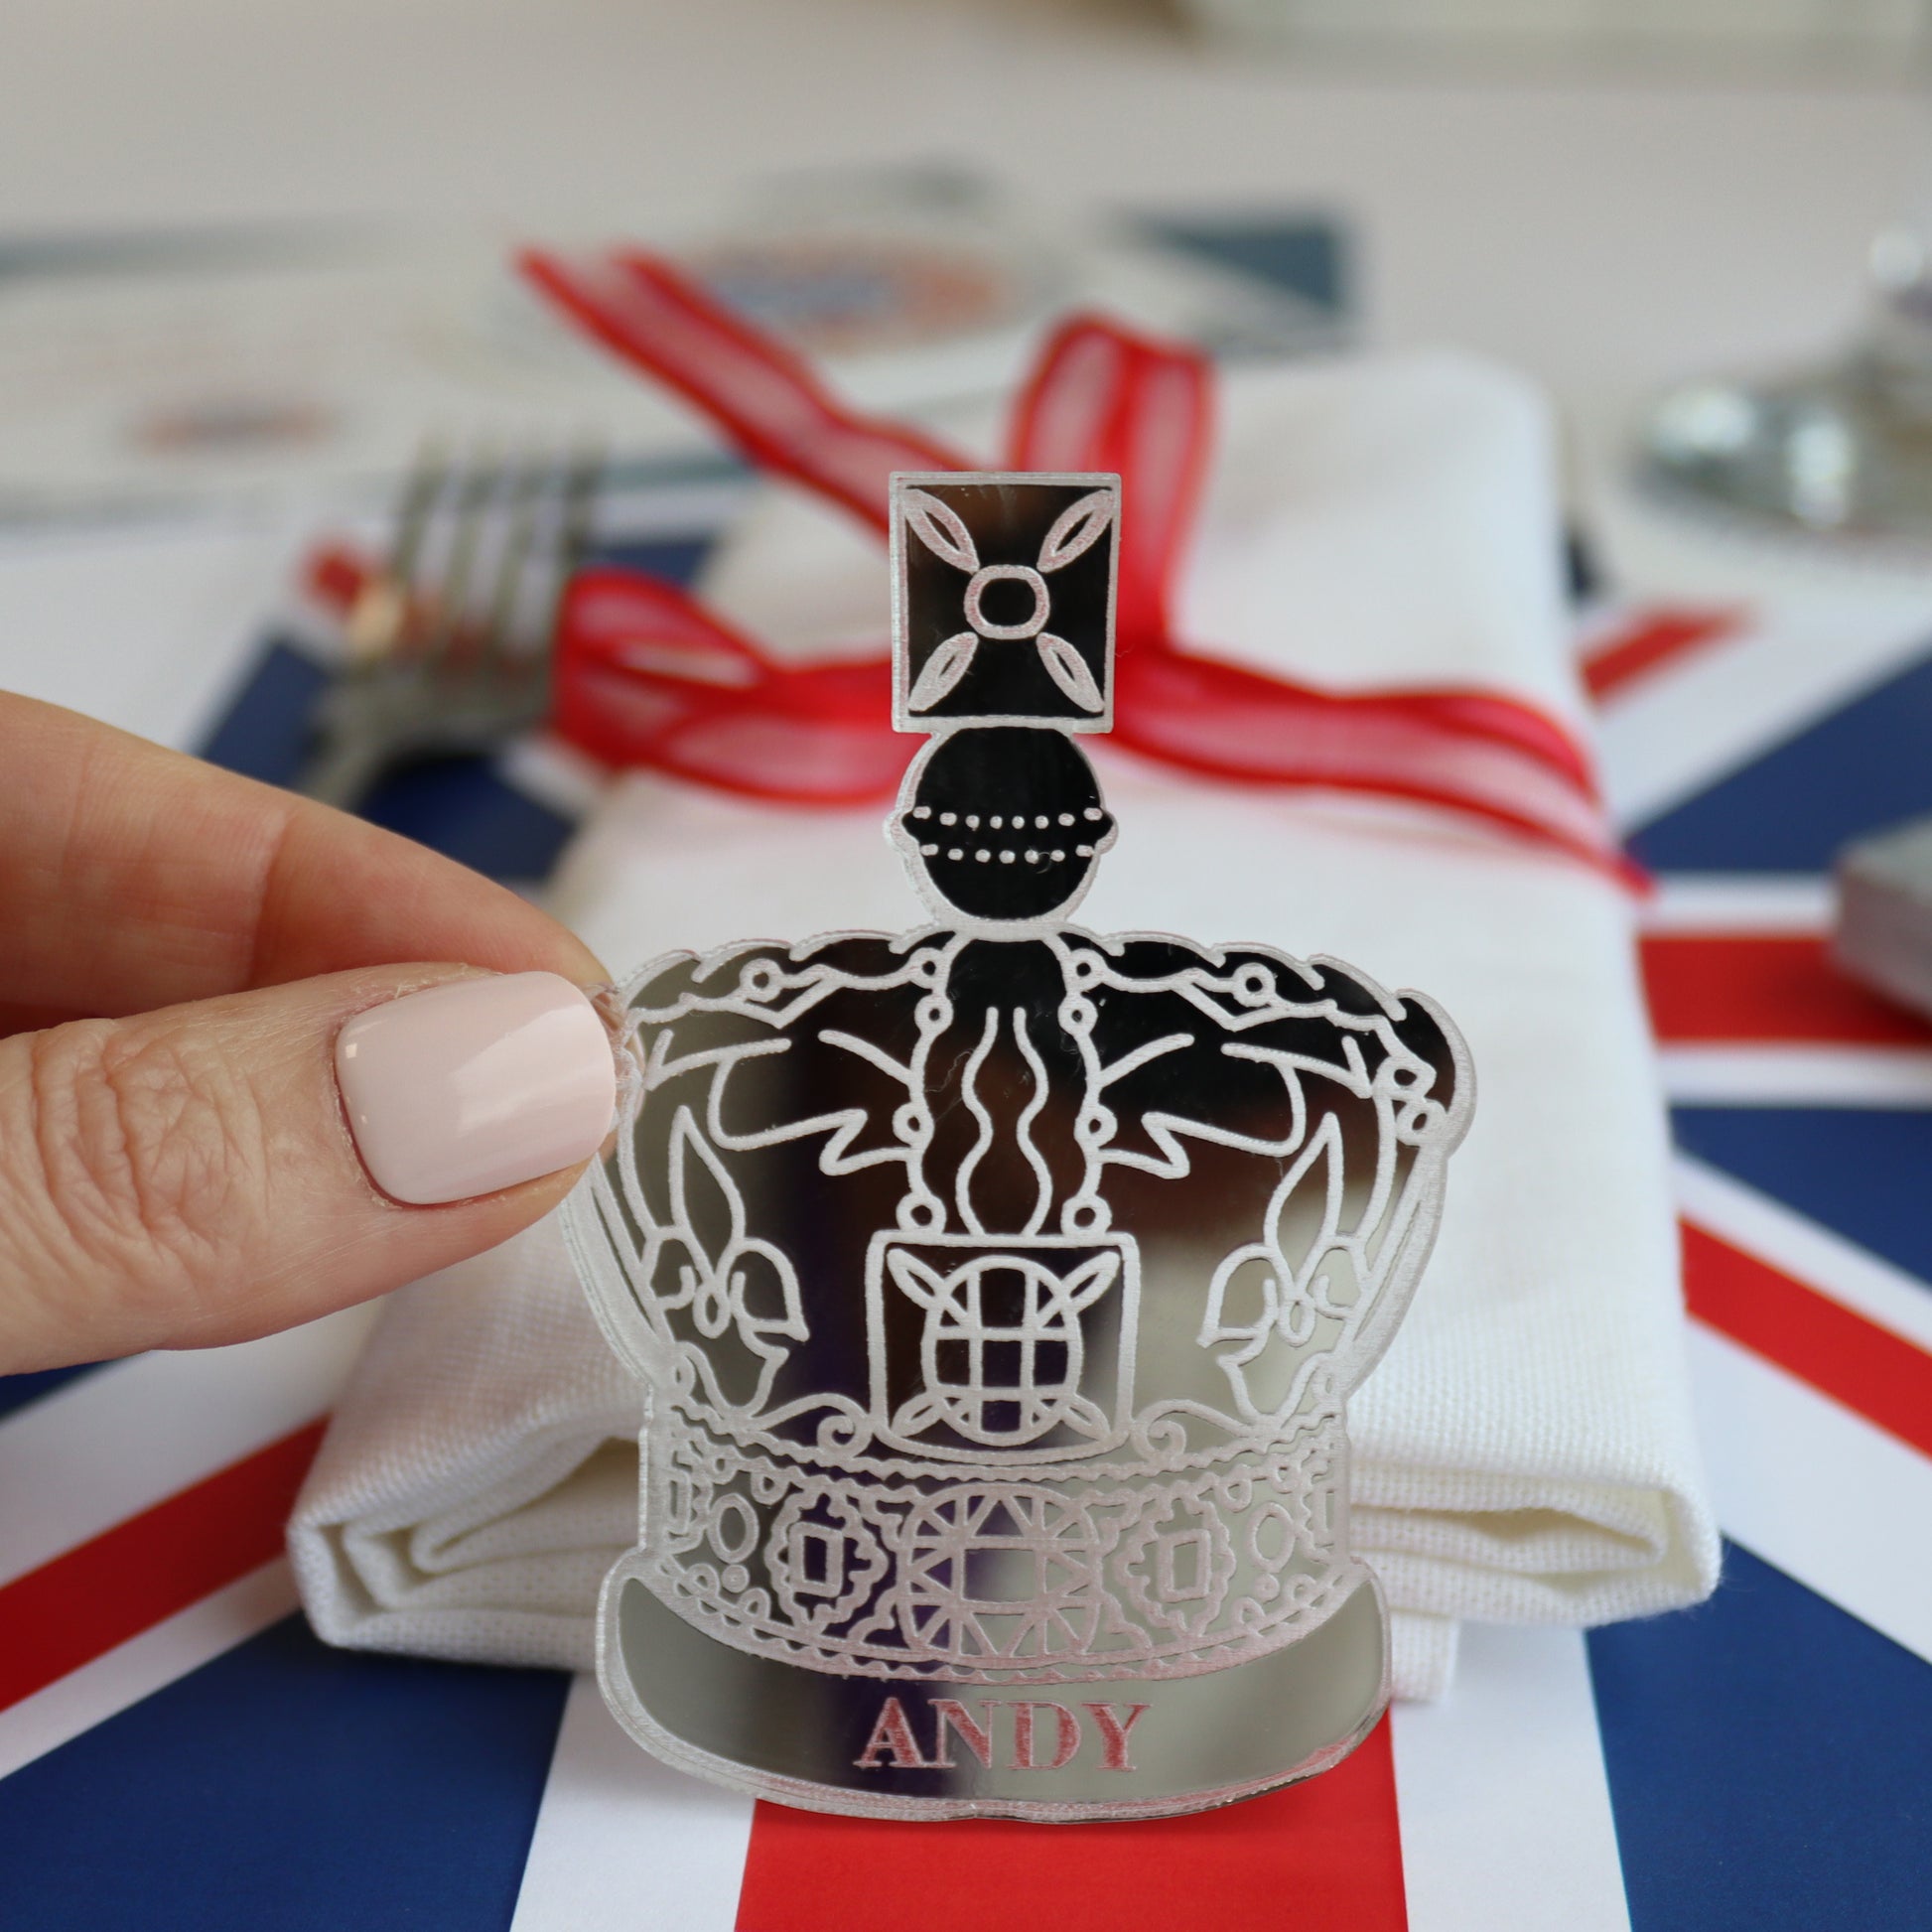 close up of table setting which is cut and engraved from silver acrylic into the shape of a crown as a personalised place setting for King's Coronation